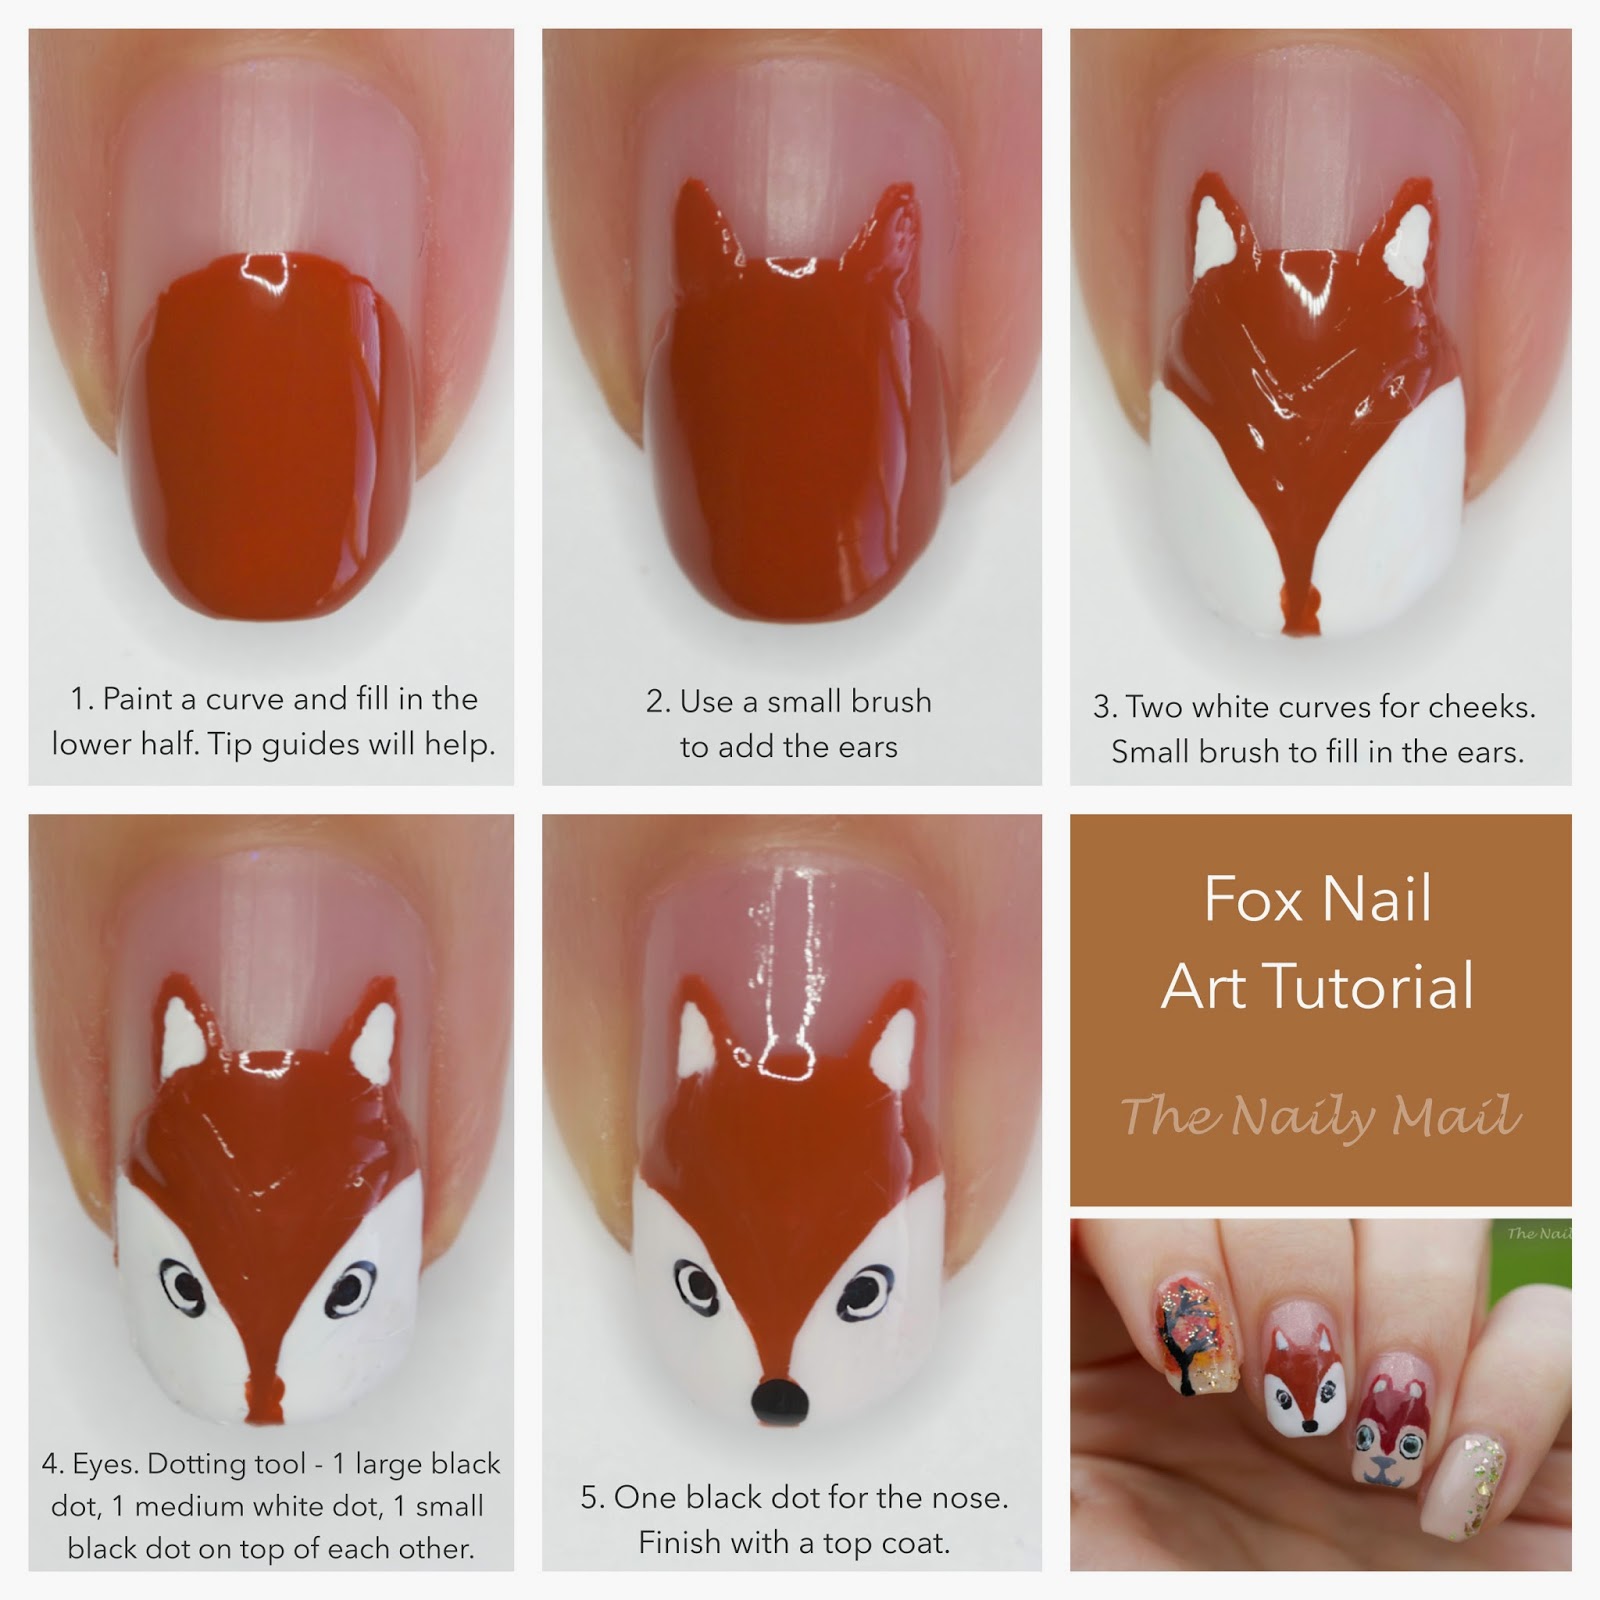 45 Cute Animal Nail Art Prints that're truly Inspirational - Latest Fashion  Trends | Animal nail art, Animal nail designs, Farm animal nails